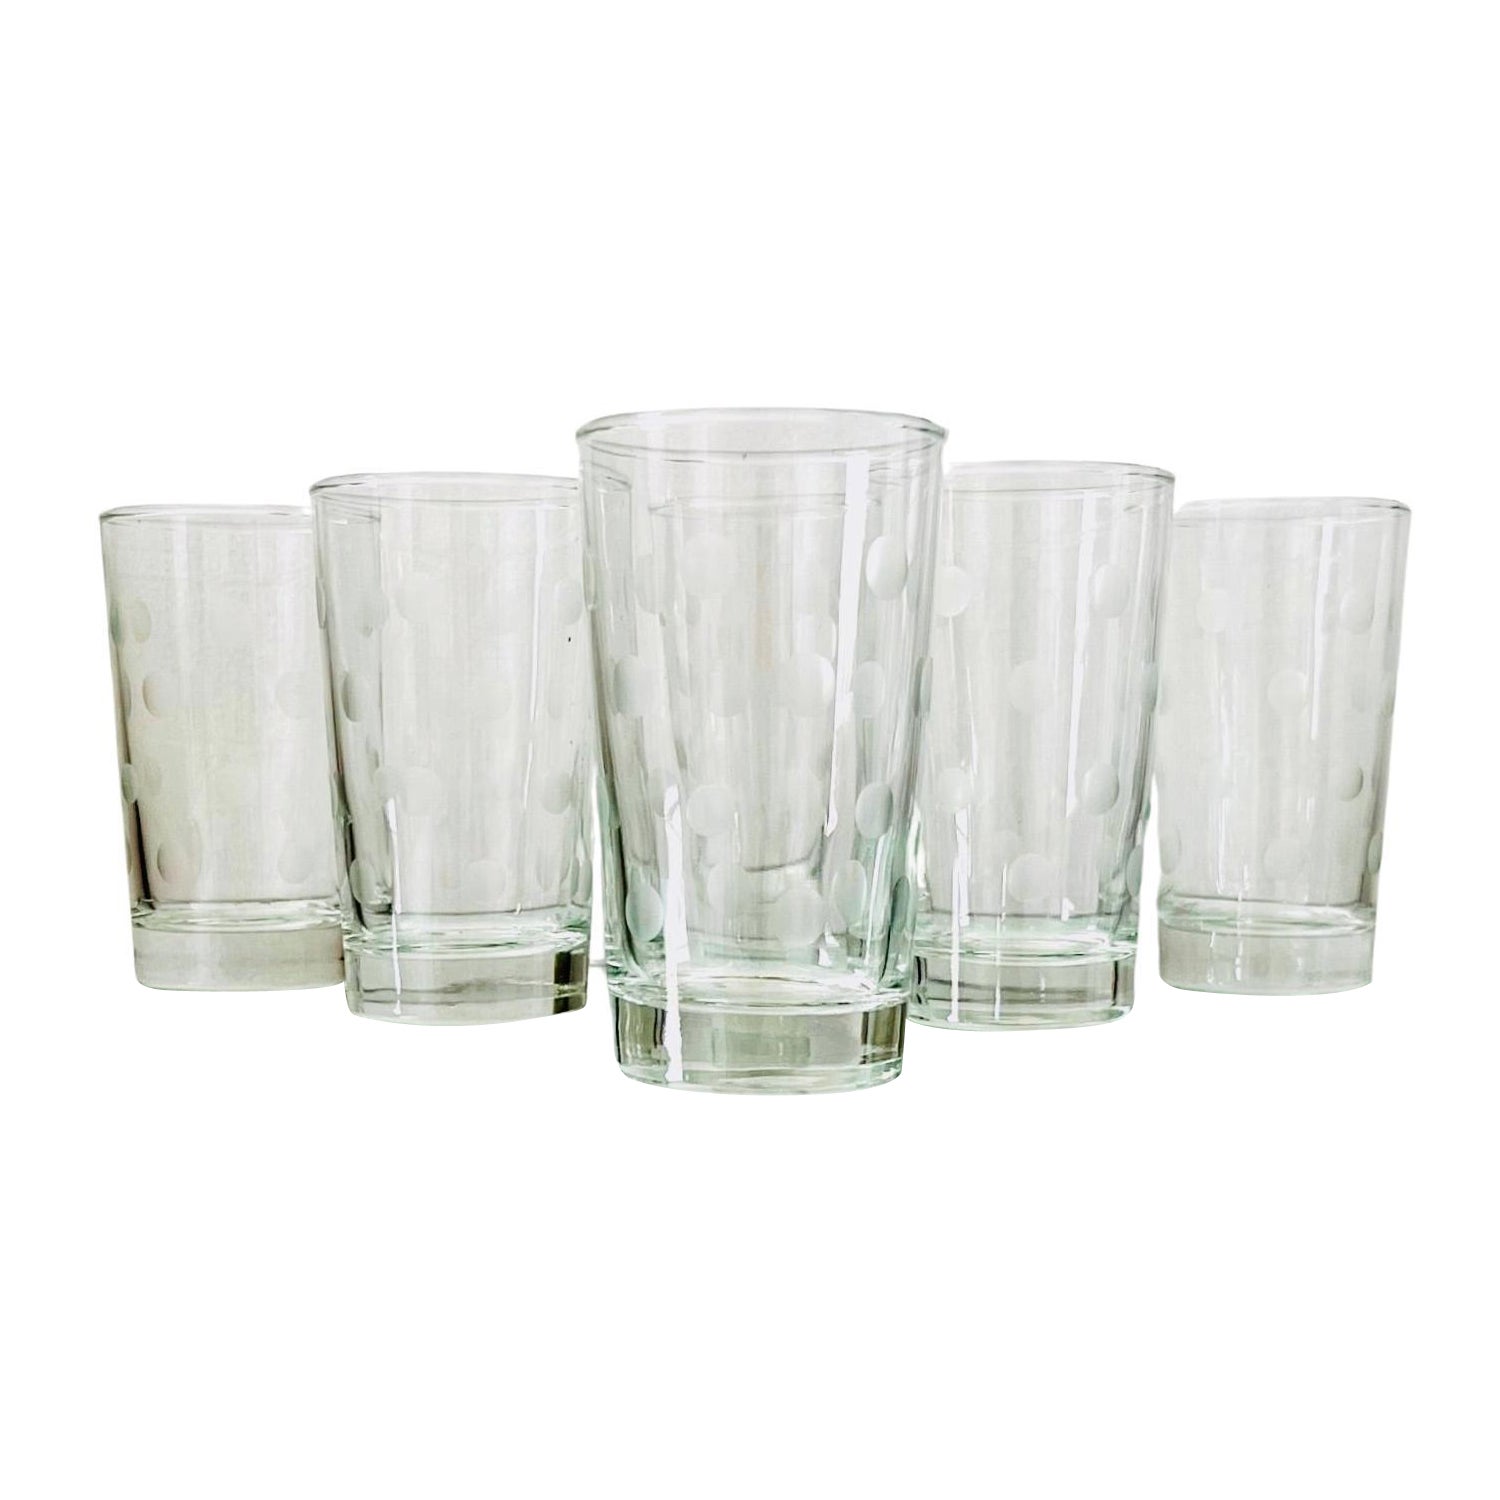 1970s Etched Polka Dot Barware or Juice Glasses, Set of Six For Sale